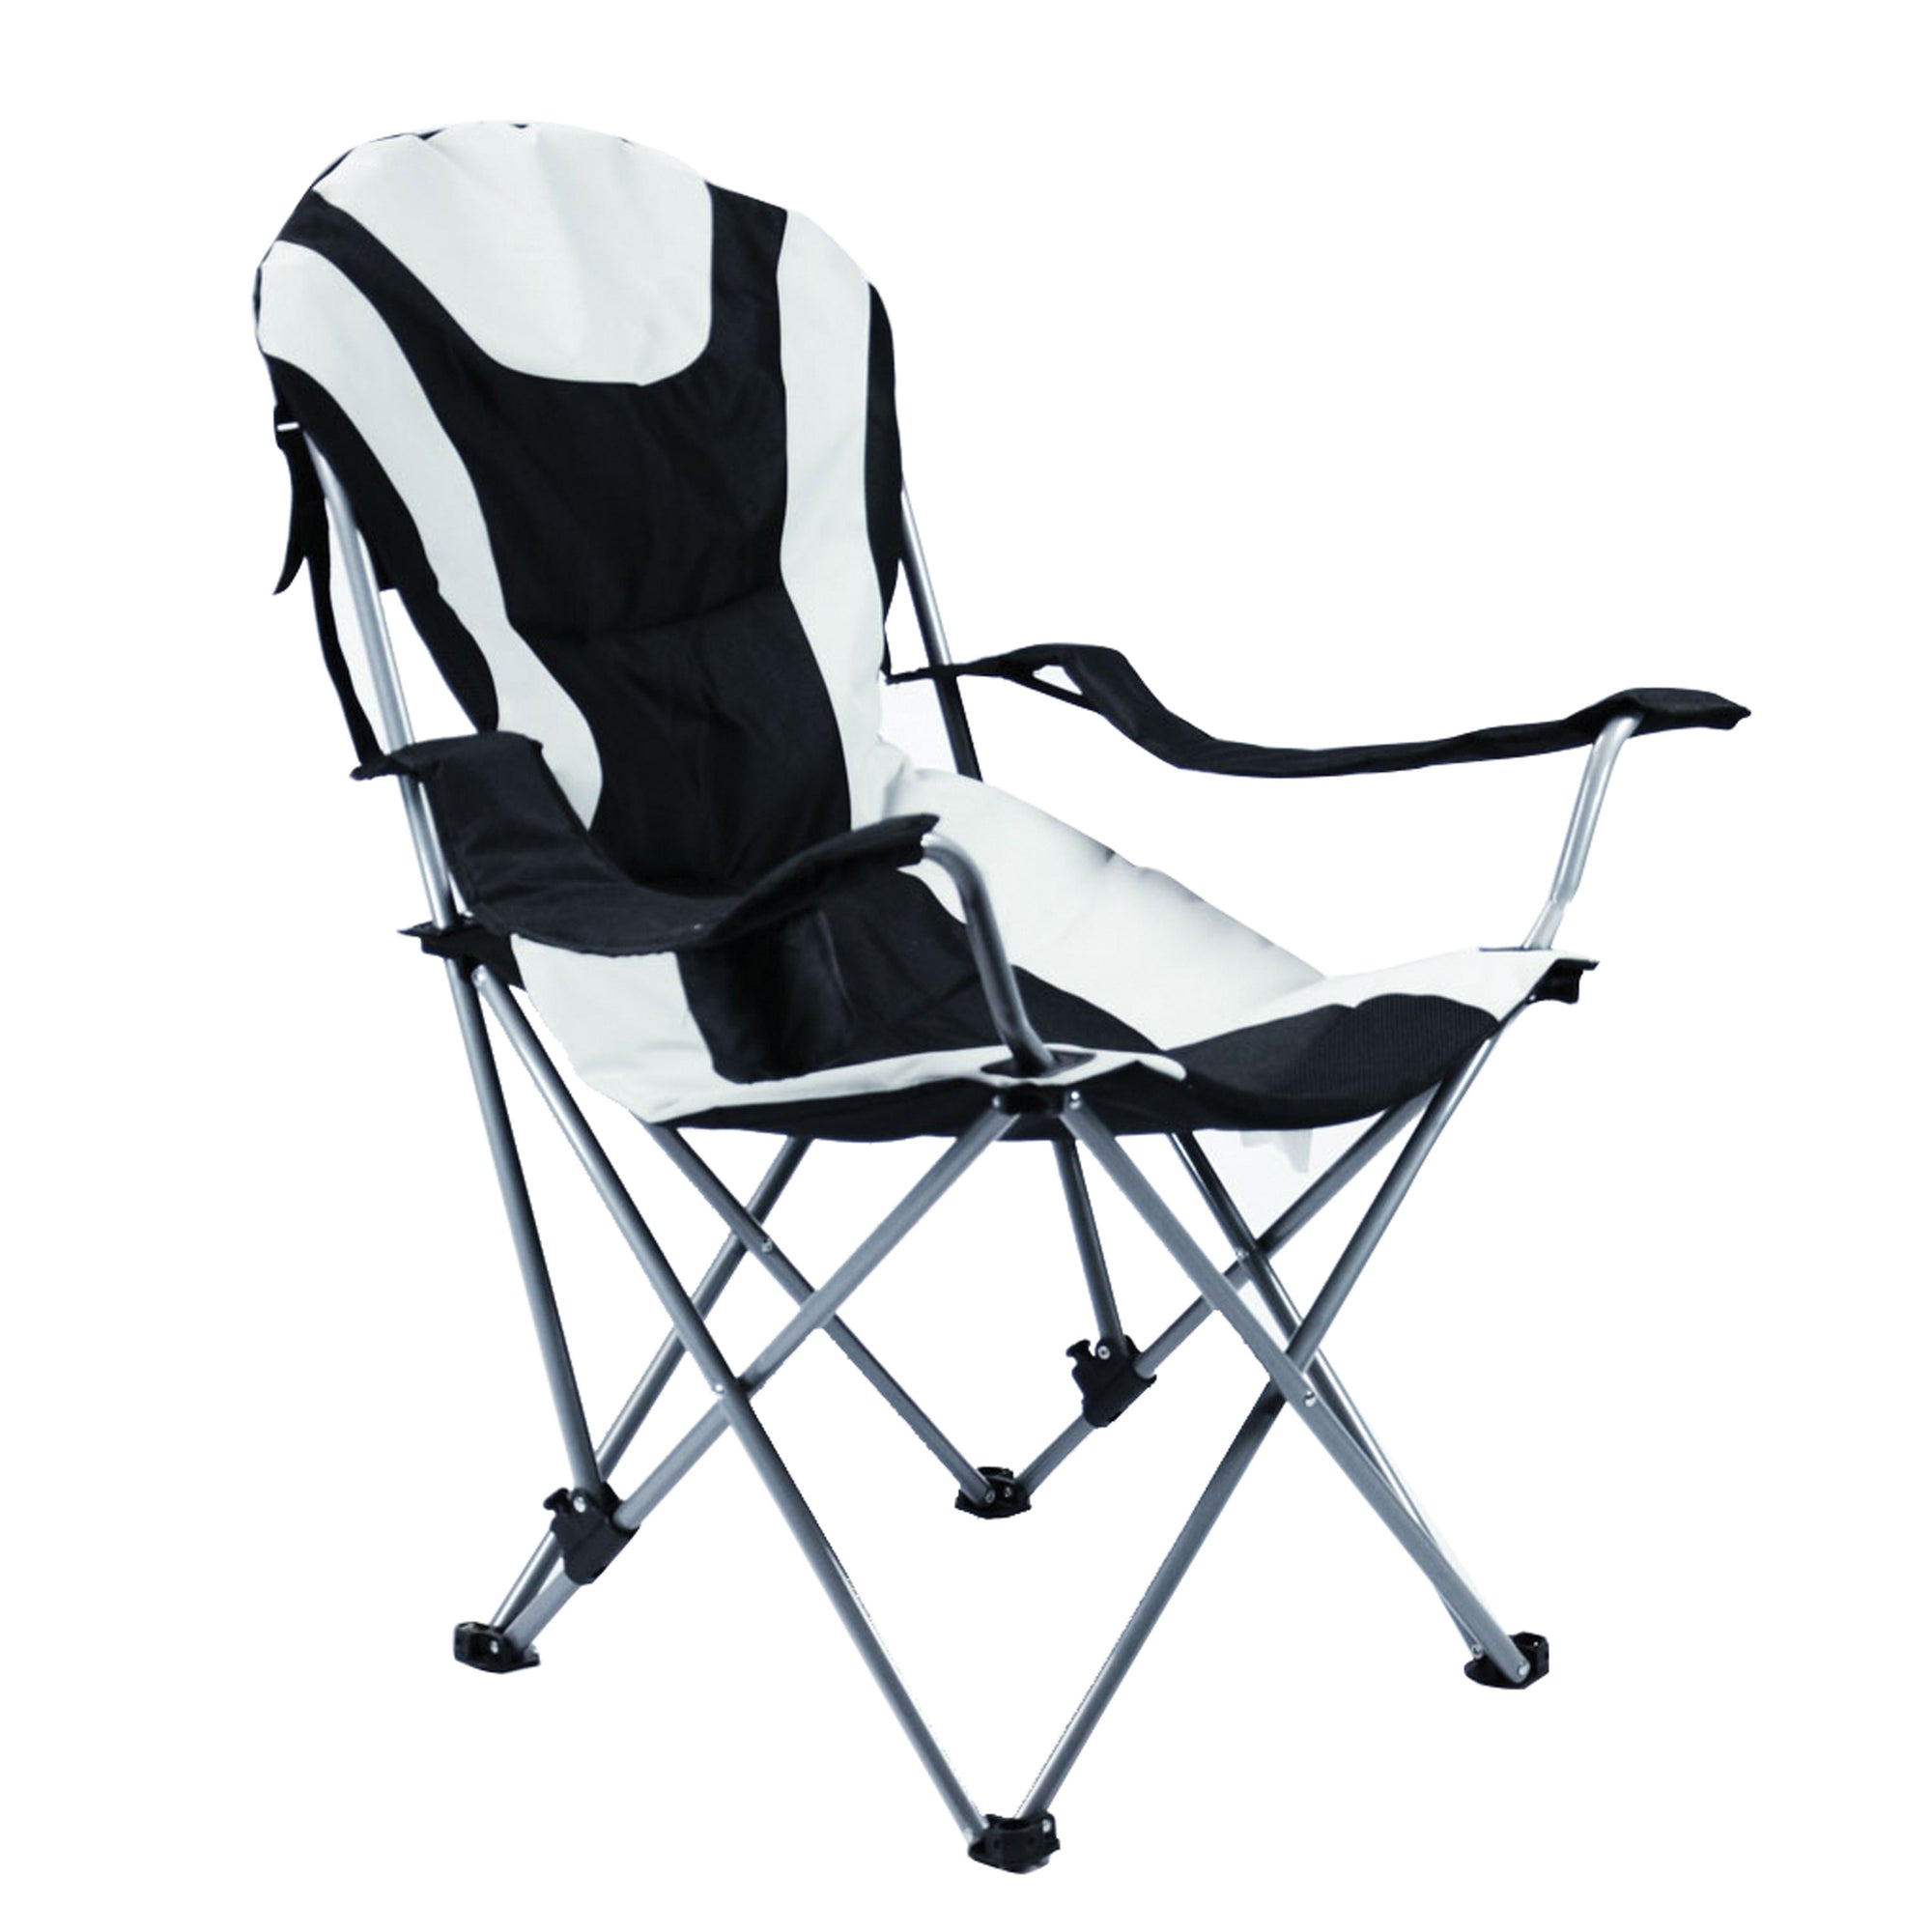 Ming's Mark 36028 Foldable Reclining Camp Chair - Black / Gray